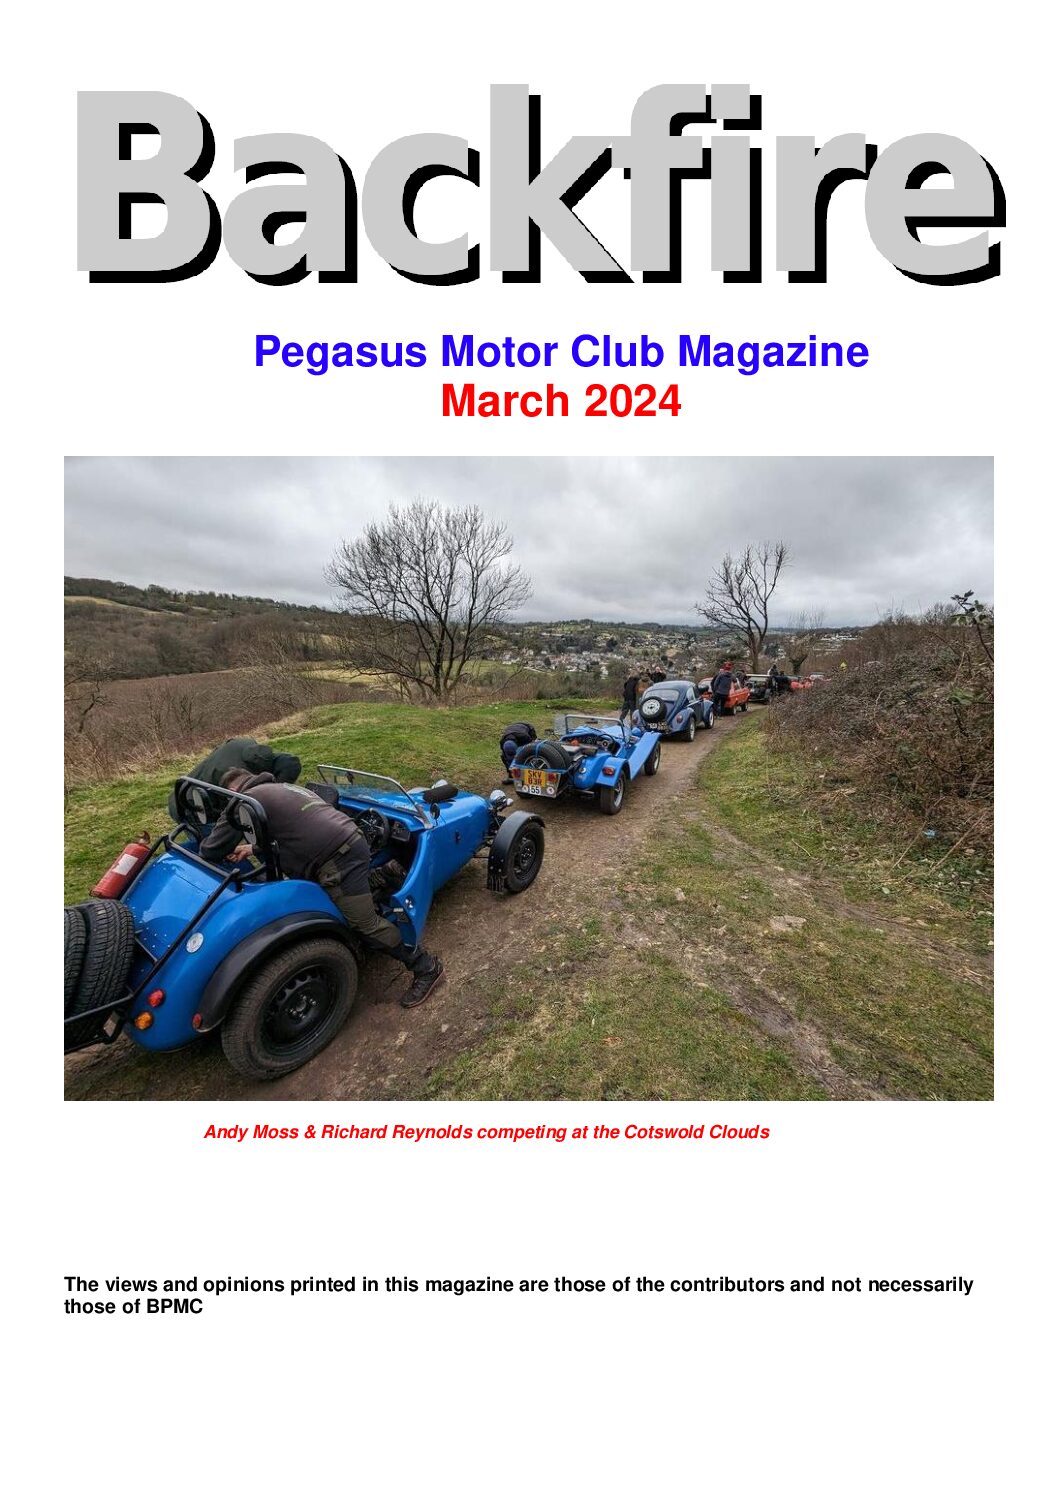 Front cover of March 2024 Issue